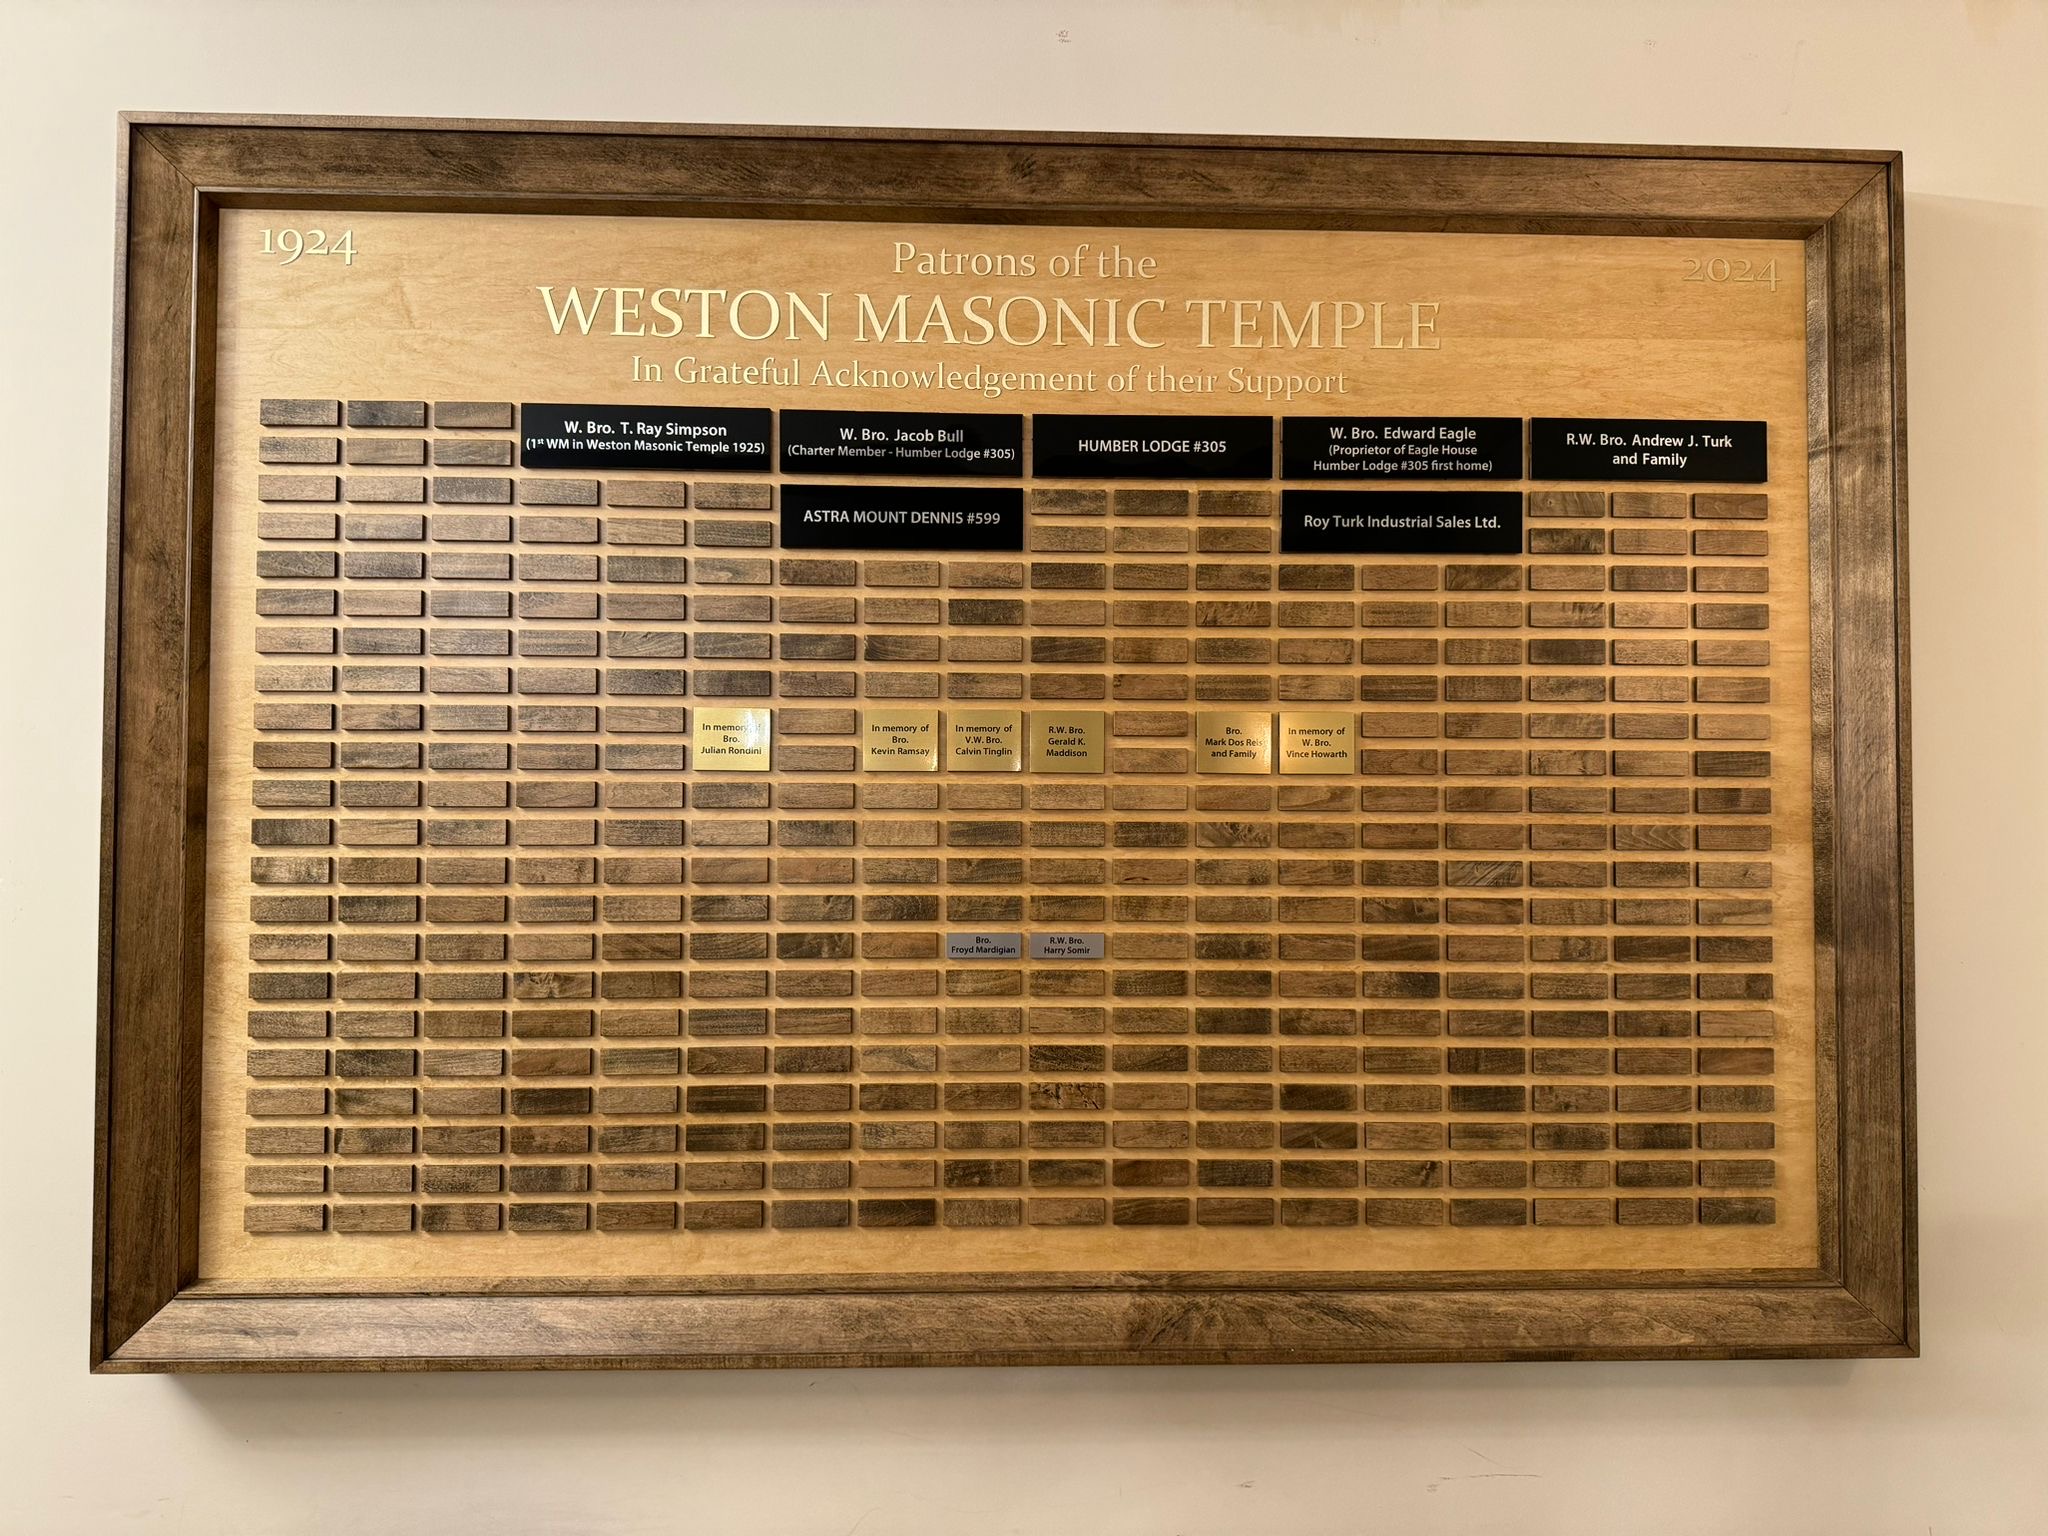 Patrons' Wall showing supporters of the Weston Masonic Temple